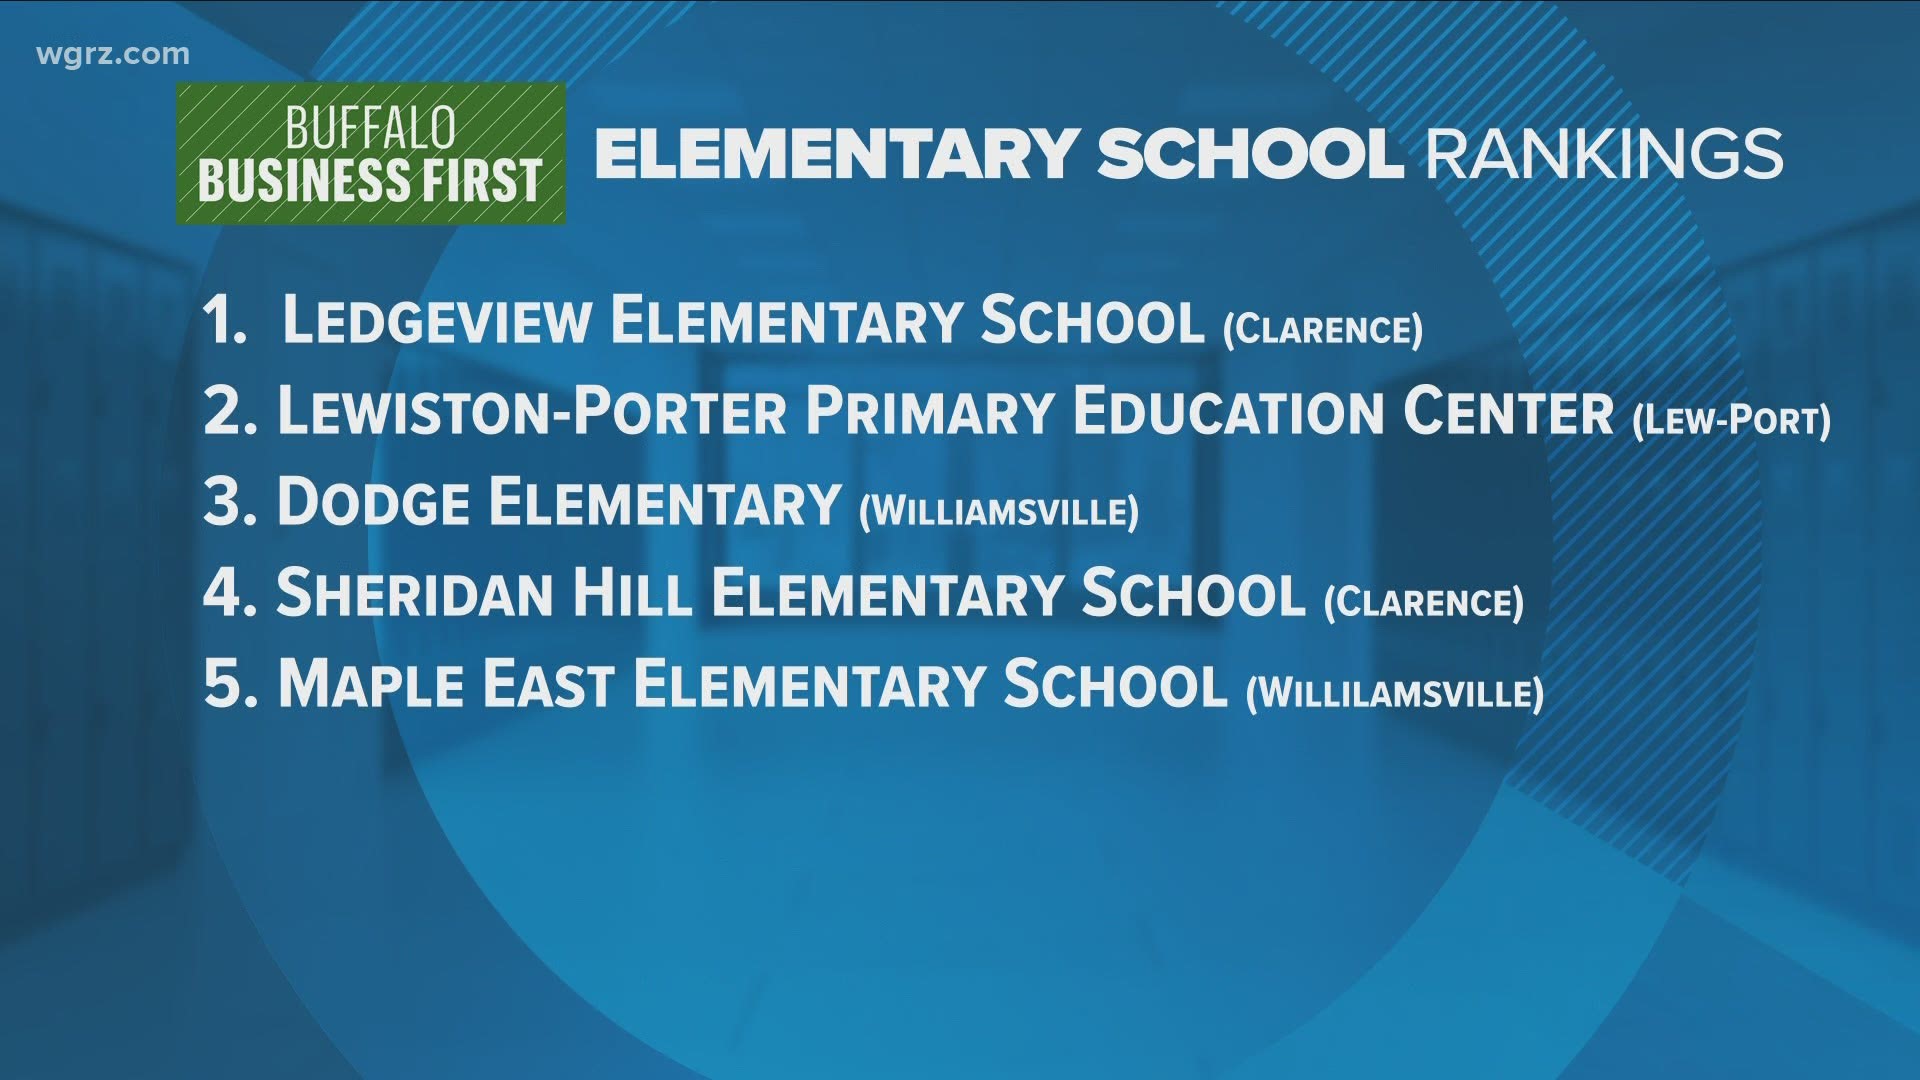 Ledgeview Elementary in Clarence comes in at number one... the same position its held since 20-14.